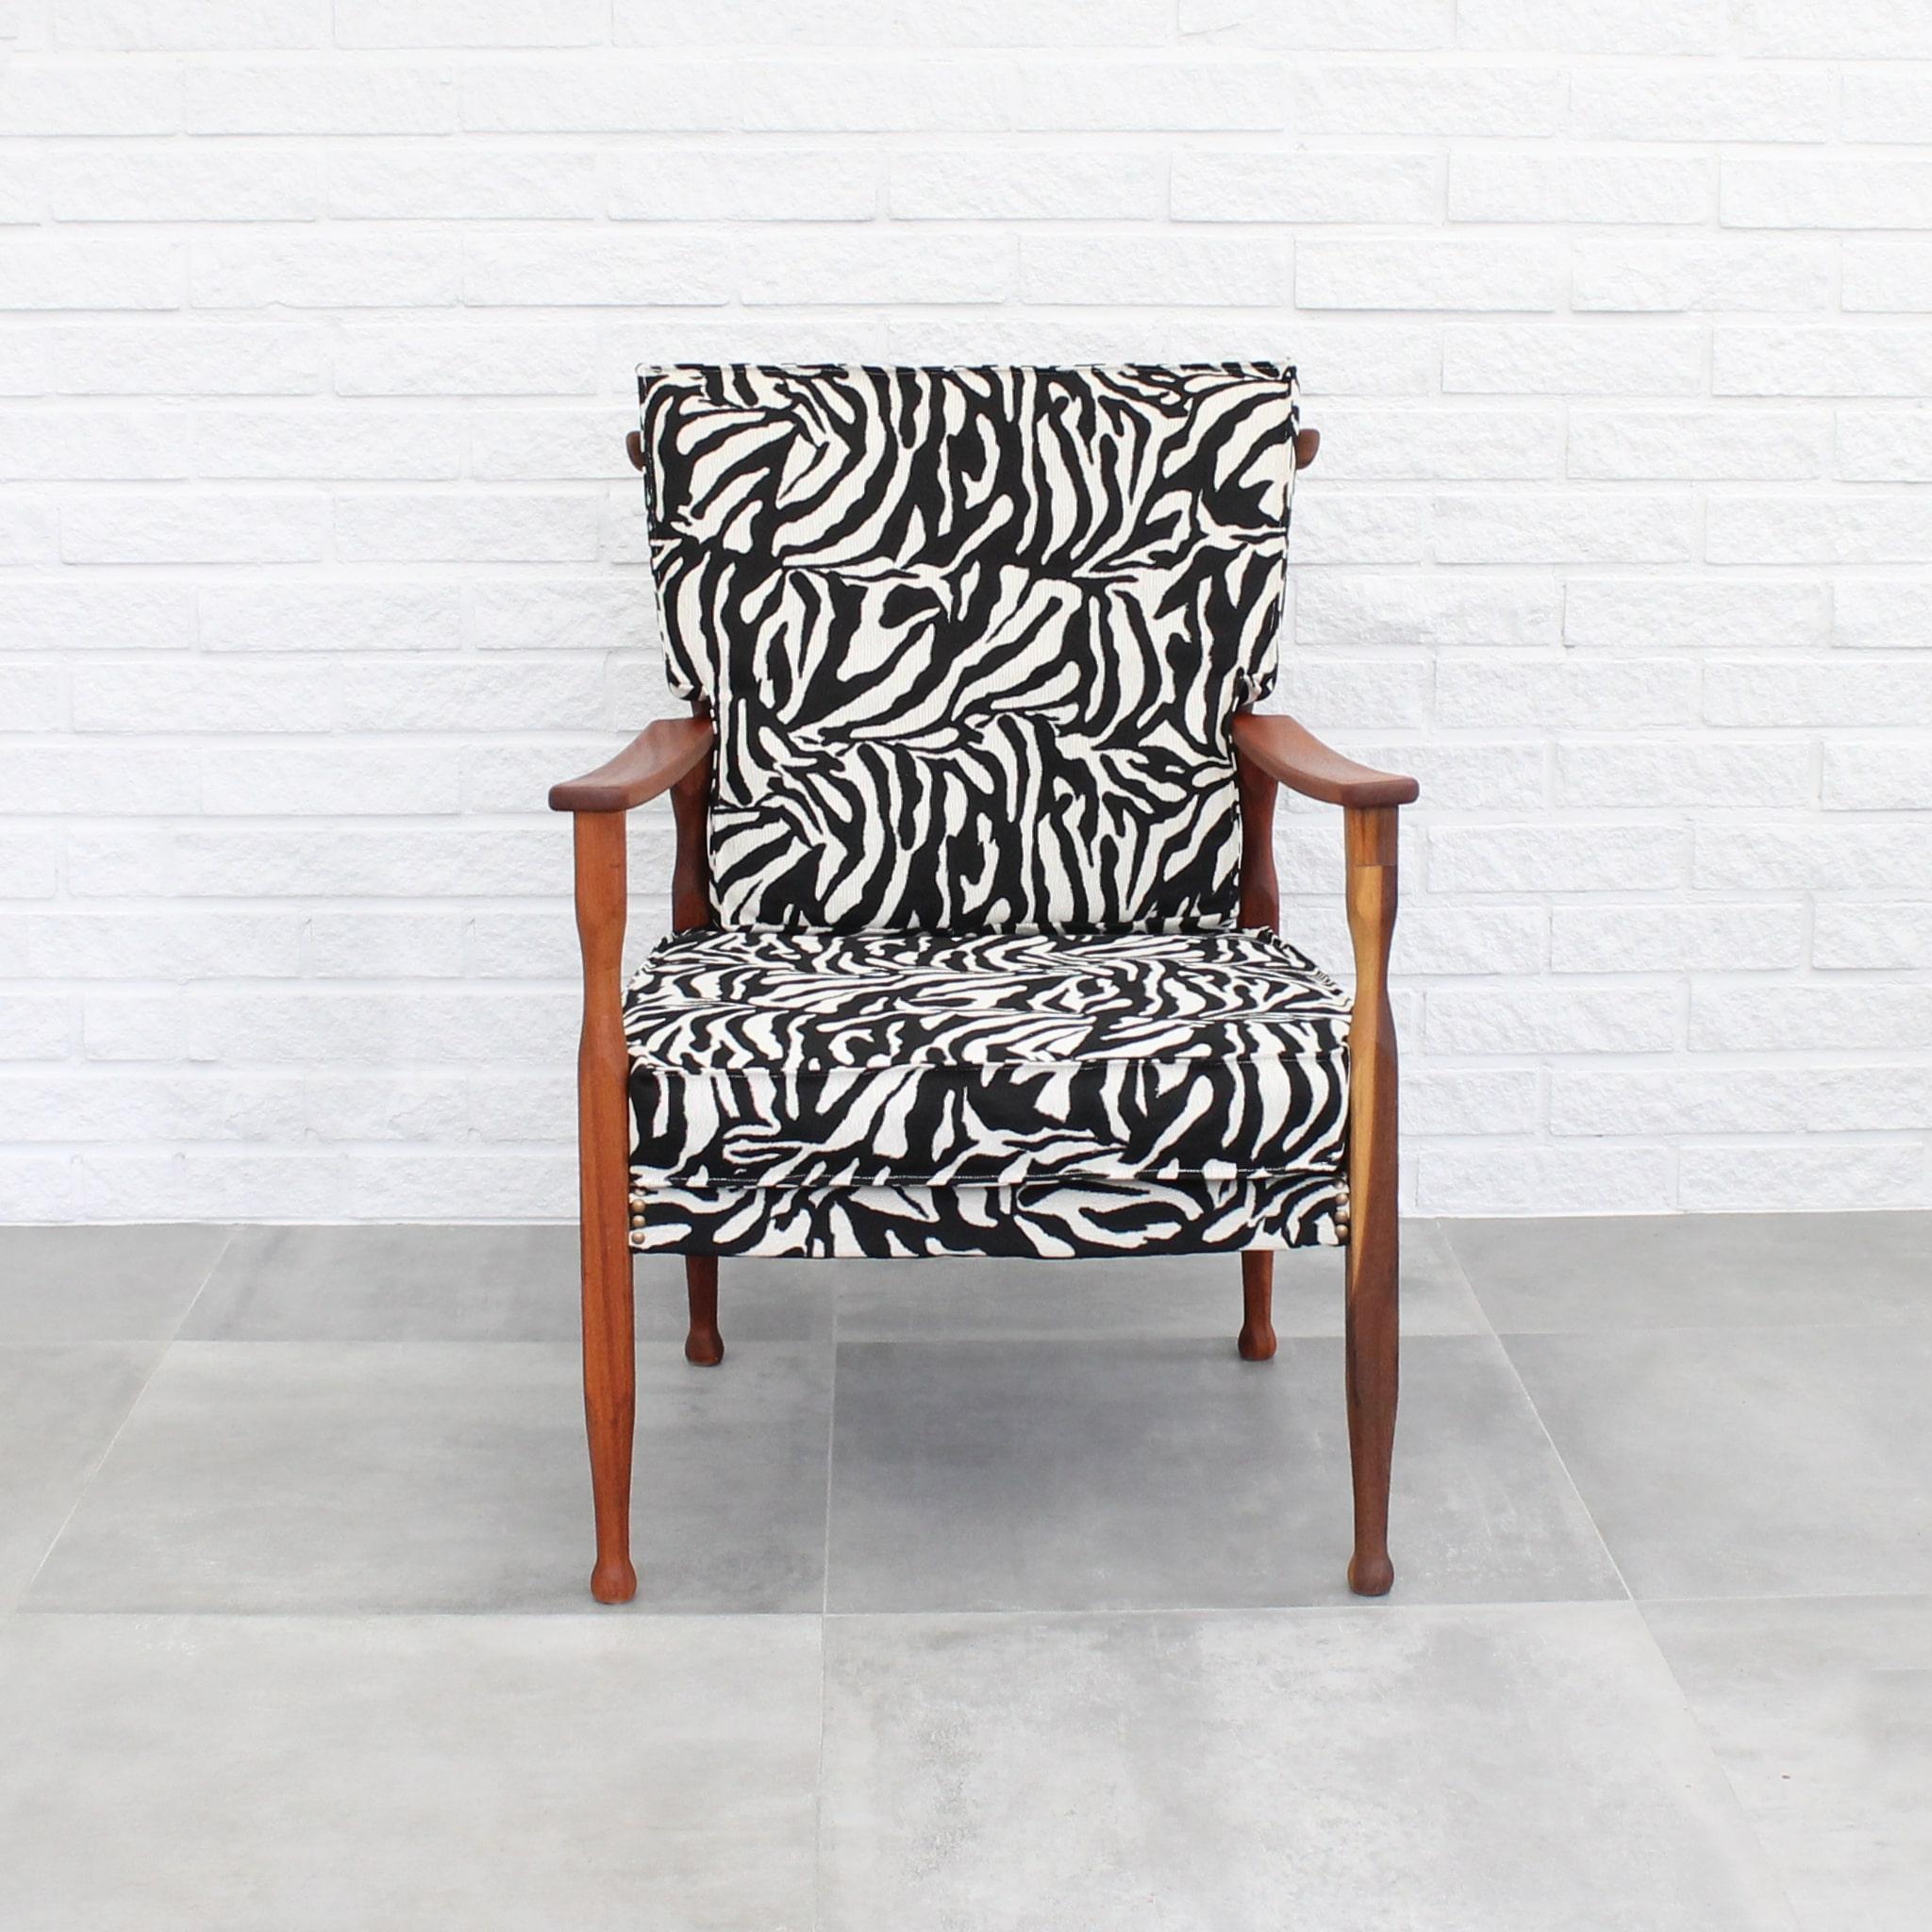 Easy chair 891 designed by Josef Frank for Firma Svenskt Tenn in 1937. Made from solid mahogany, reupholstered in a striking zebra-striped textile. The Austrian architect Josef Frank, who was raised in Vienna and educated at the Konstgewerbeschule,